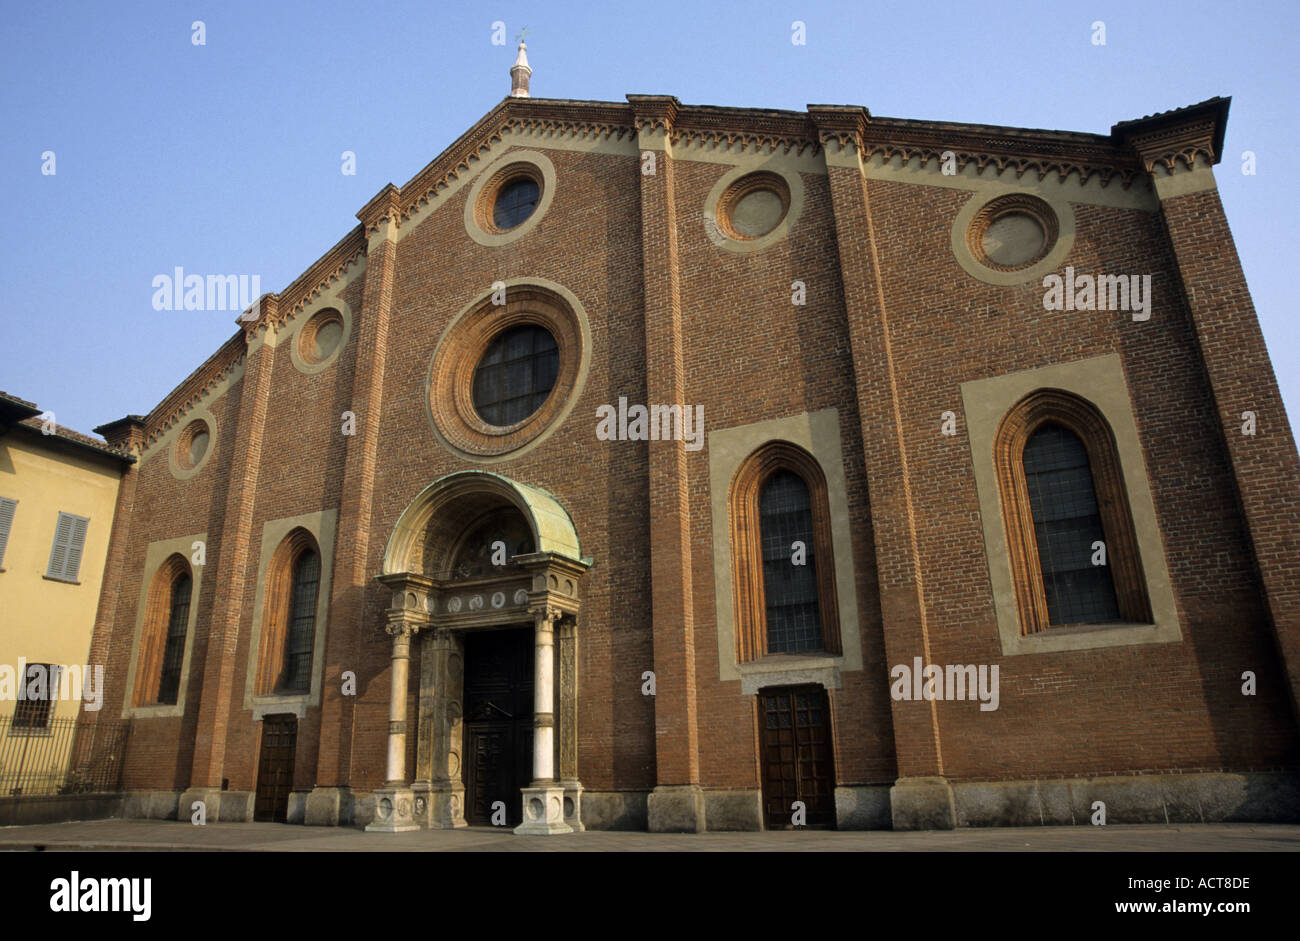 Brick exterior of the Santa Maria delle Grazie (Holy Mary of Grace) church and convent, Milan, Italy. Stock Photo